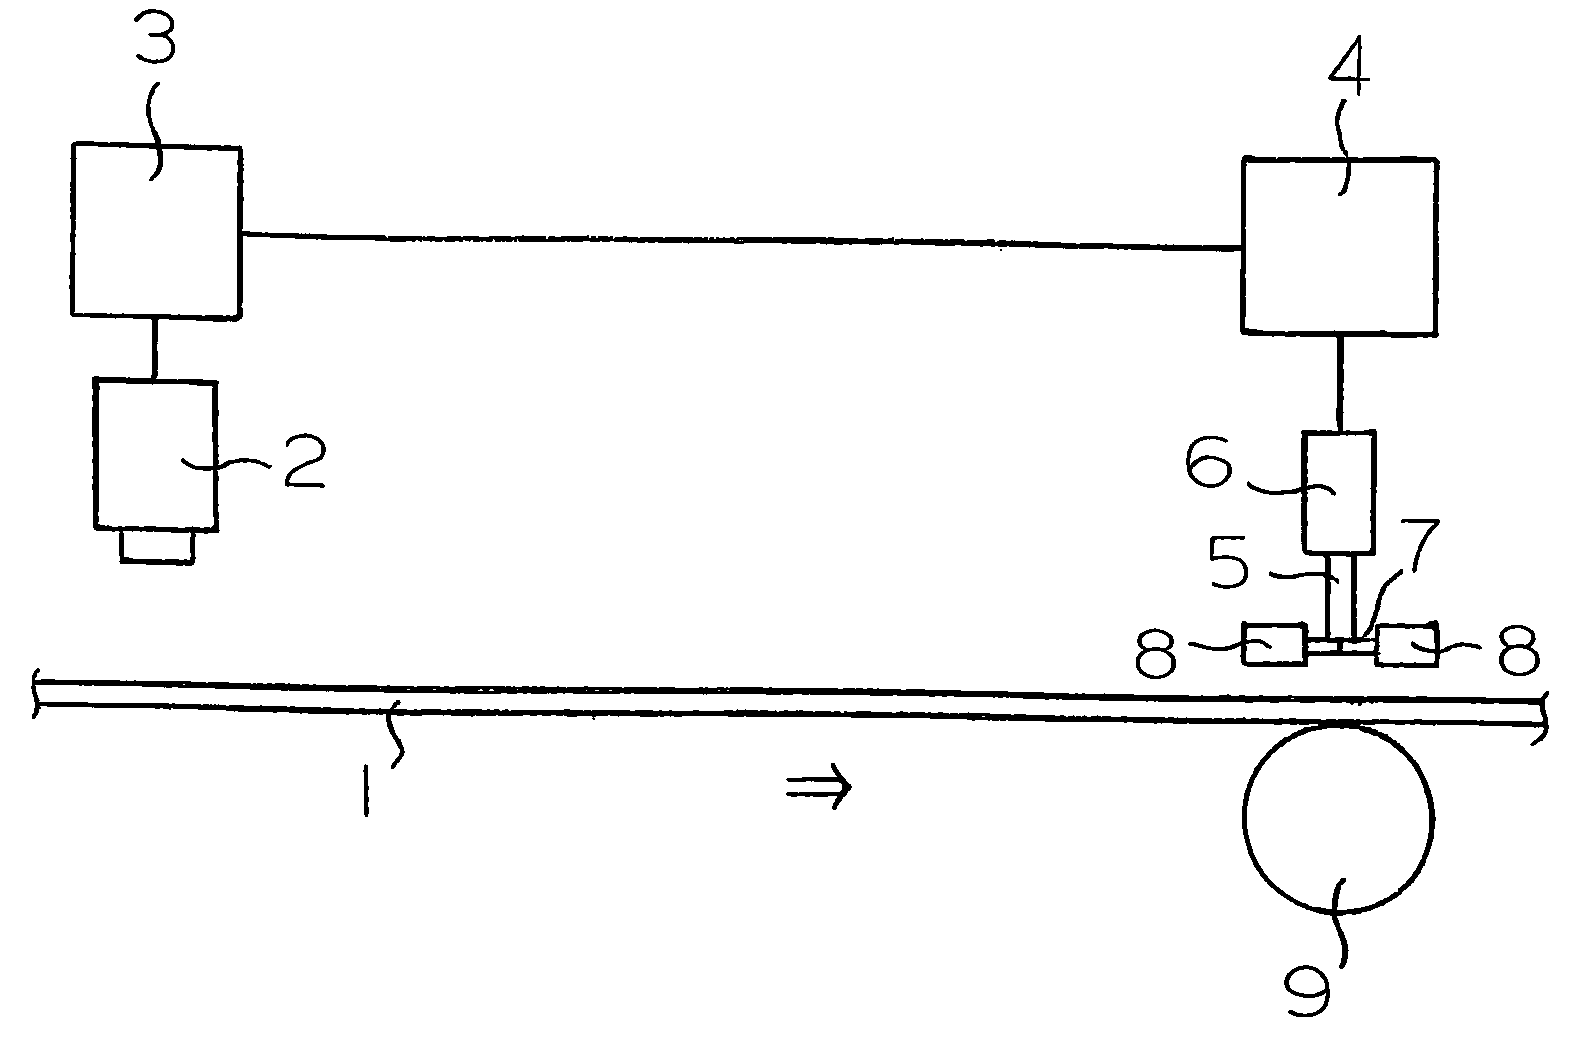 Apparatus for marking a defect